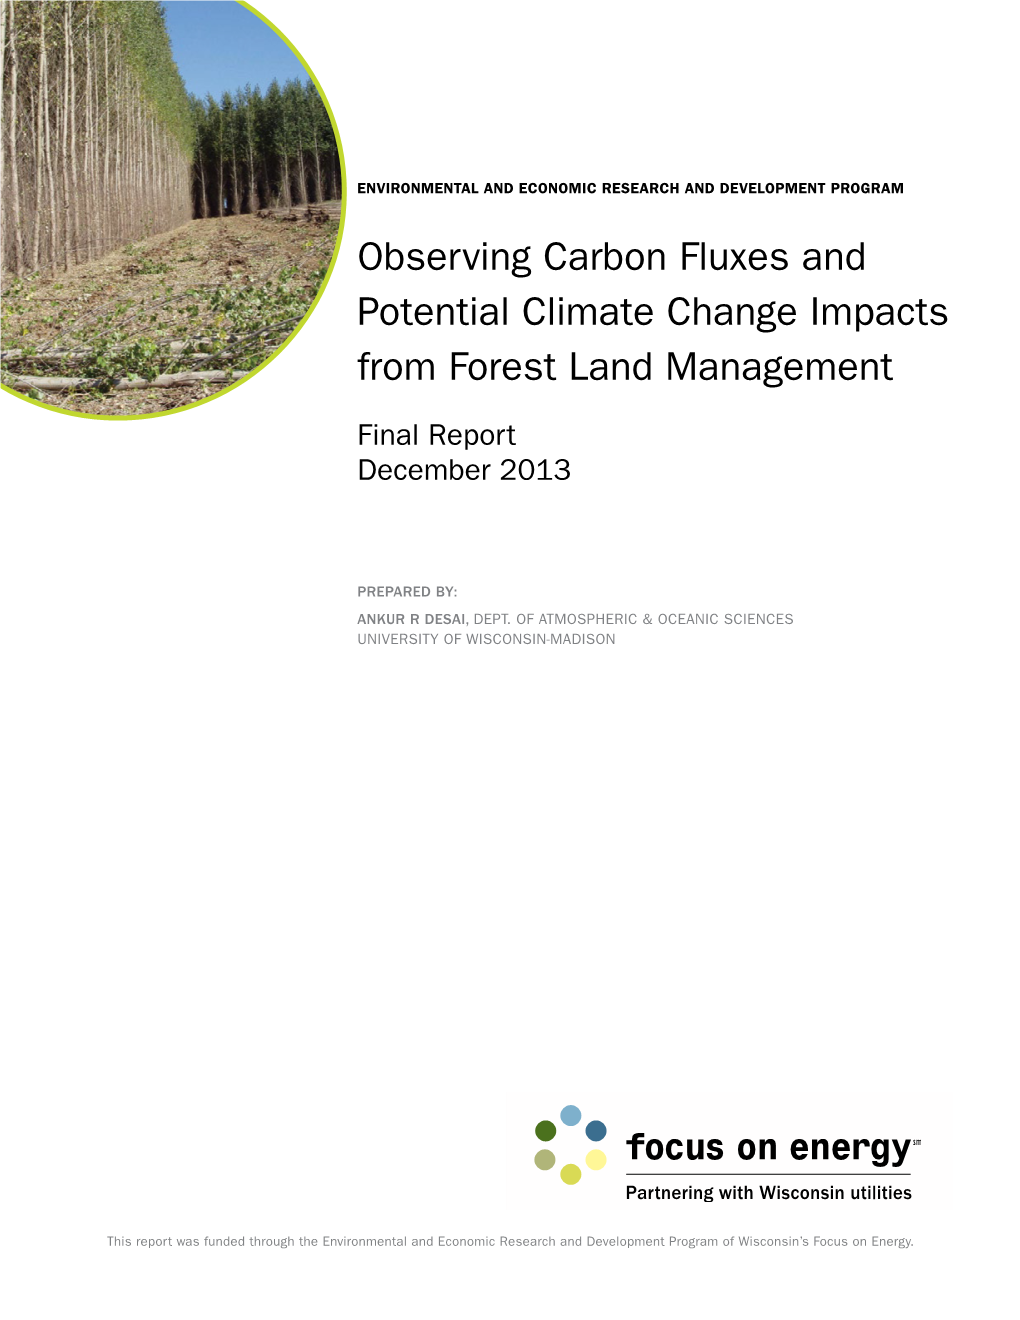 Observing Carbon Fluxes and Potential Climate Change Impacts from Forest Land Management